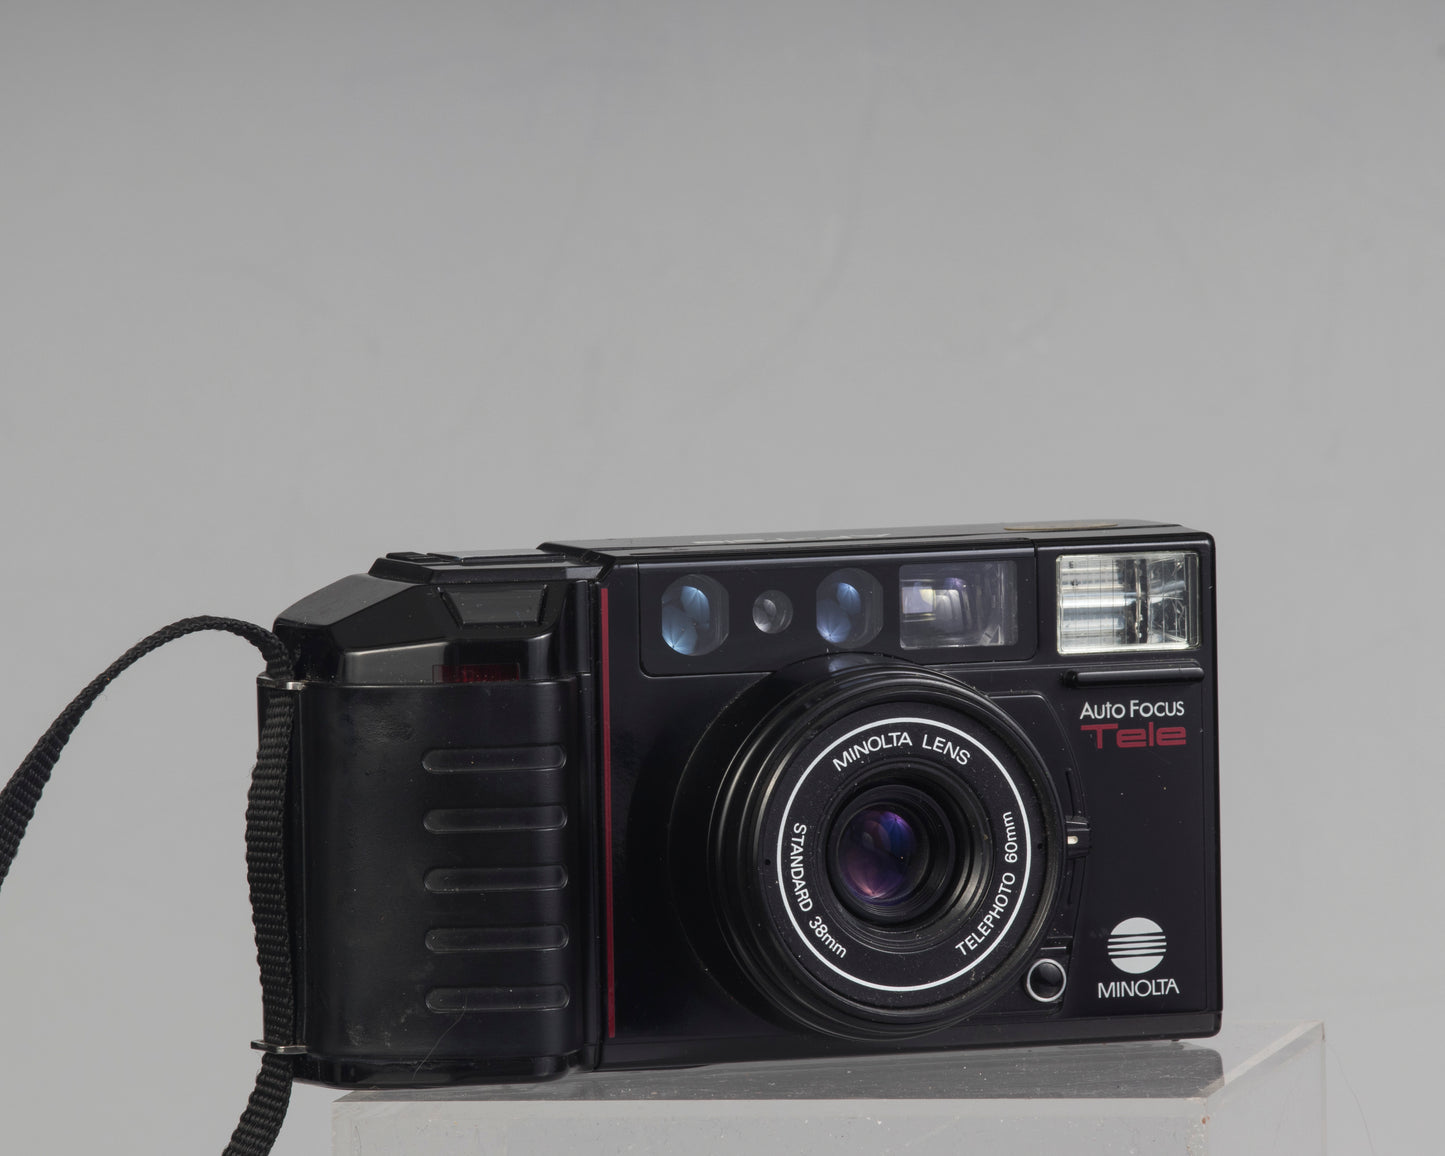 The Minolta AF Tele is an auto focus dual lens 35mm point-and-shoot camera from the mid 1980s